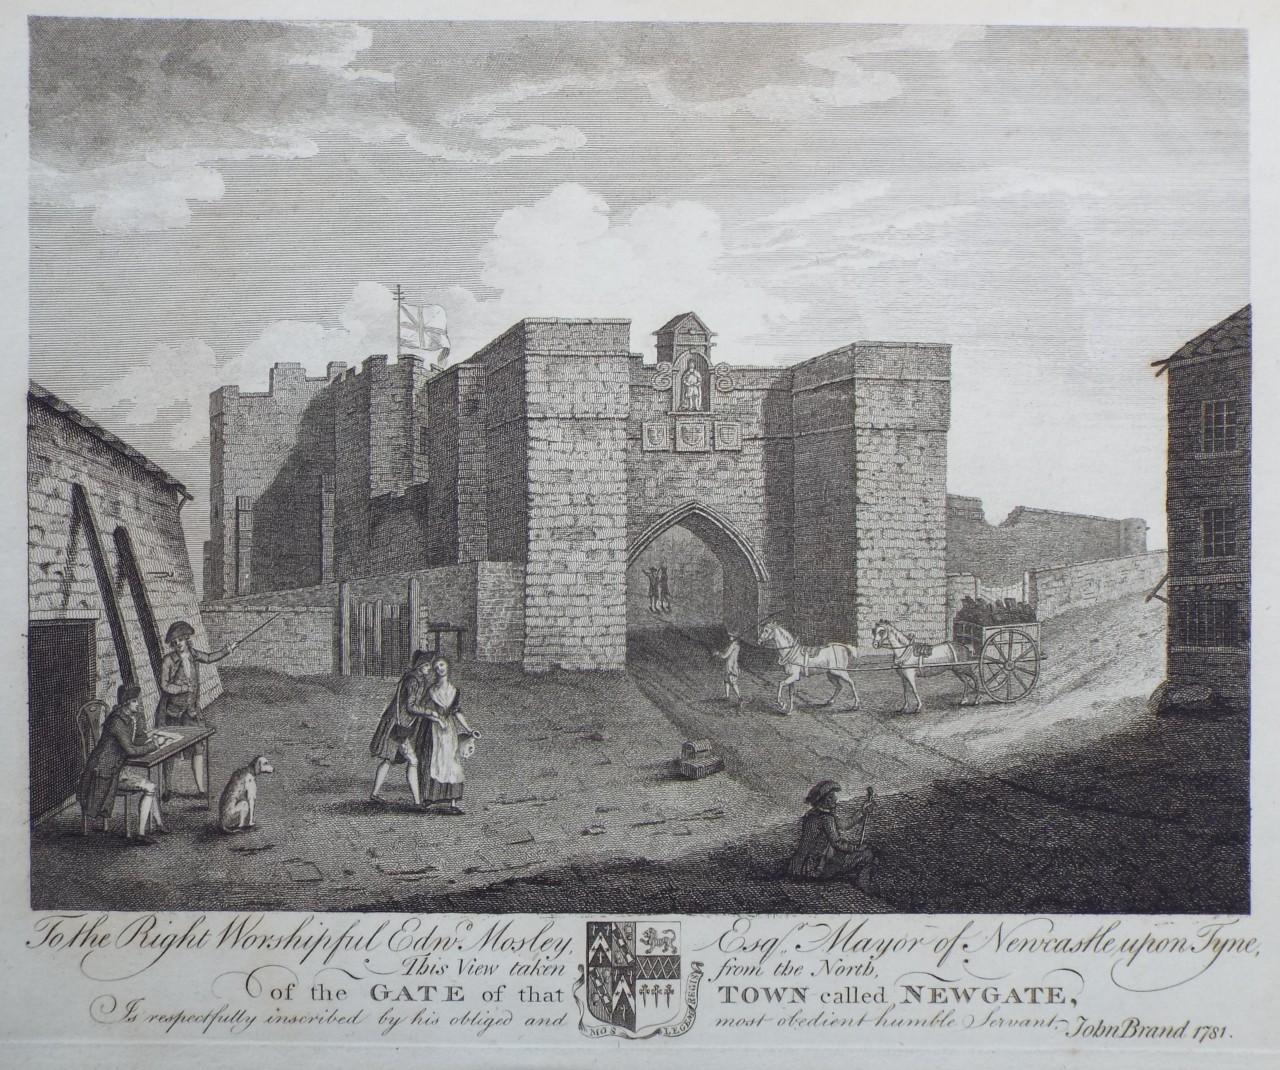 Print - To the Right Worshipful Edwd. Mosley Esqr. Mayor of Newcastle upon Tyne, This View taken from the North, of the Gate of that Town called Newgate...